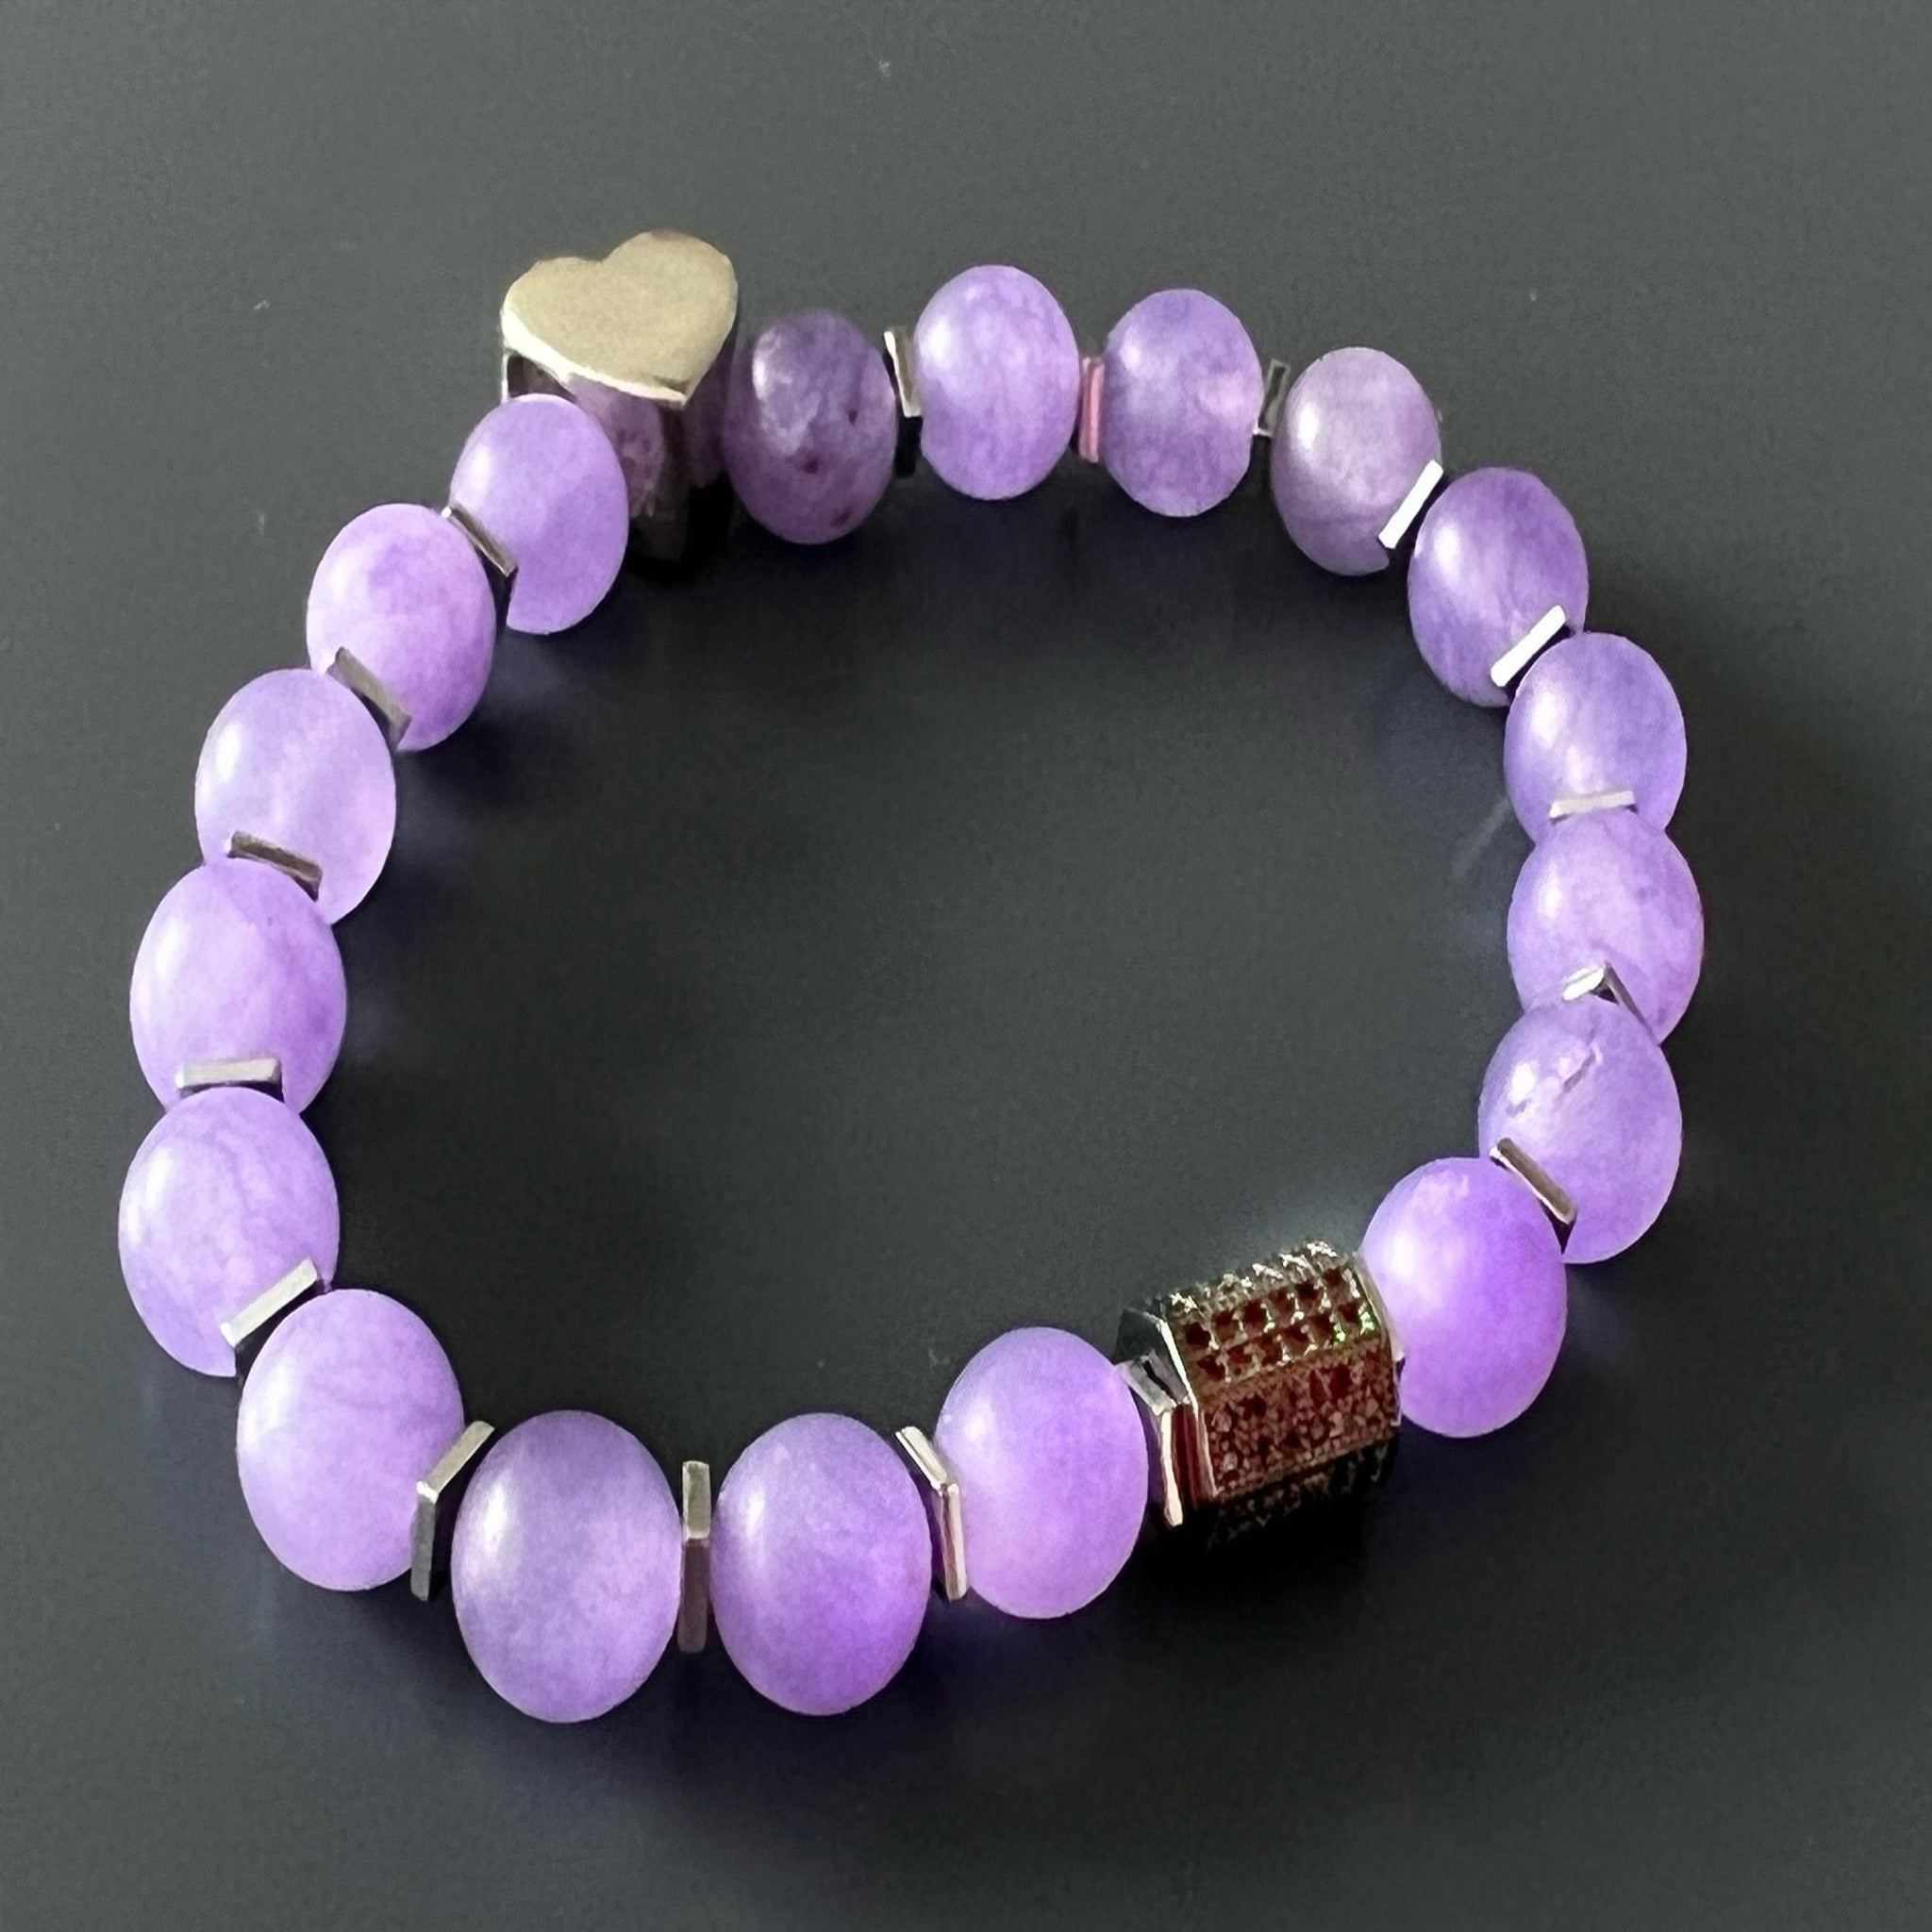 Add a touch of love and sophistication to your style with the Violet Love Bracelet, adorned with purple jade beads, sterling silver heart charms, and a glistening Swarovski crystal accent.